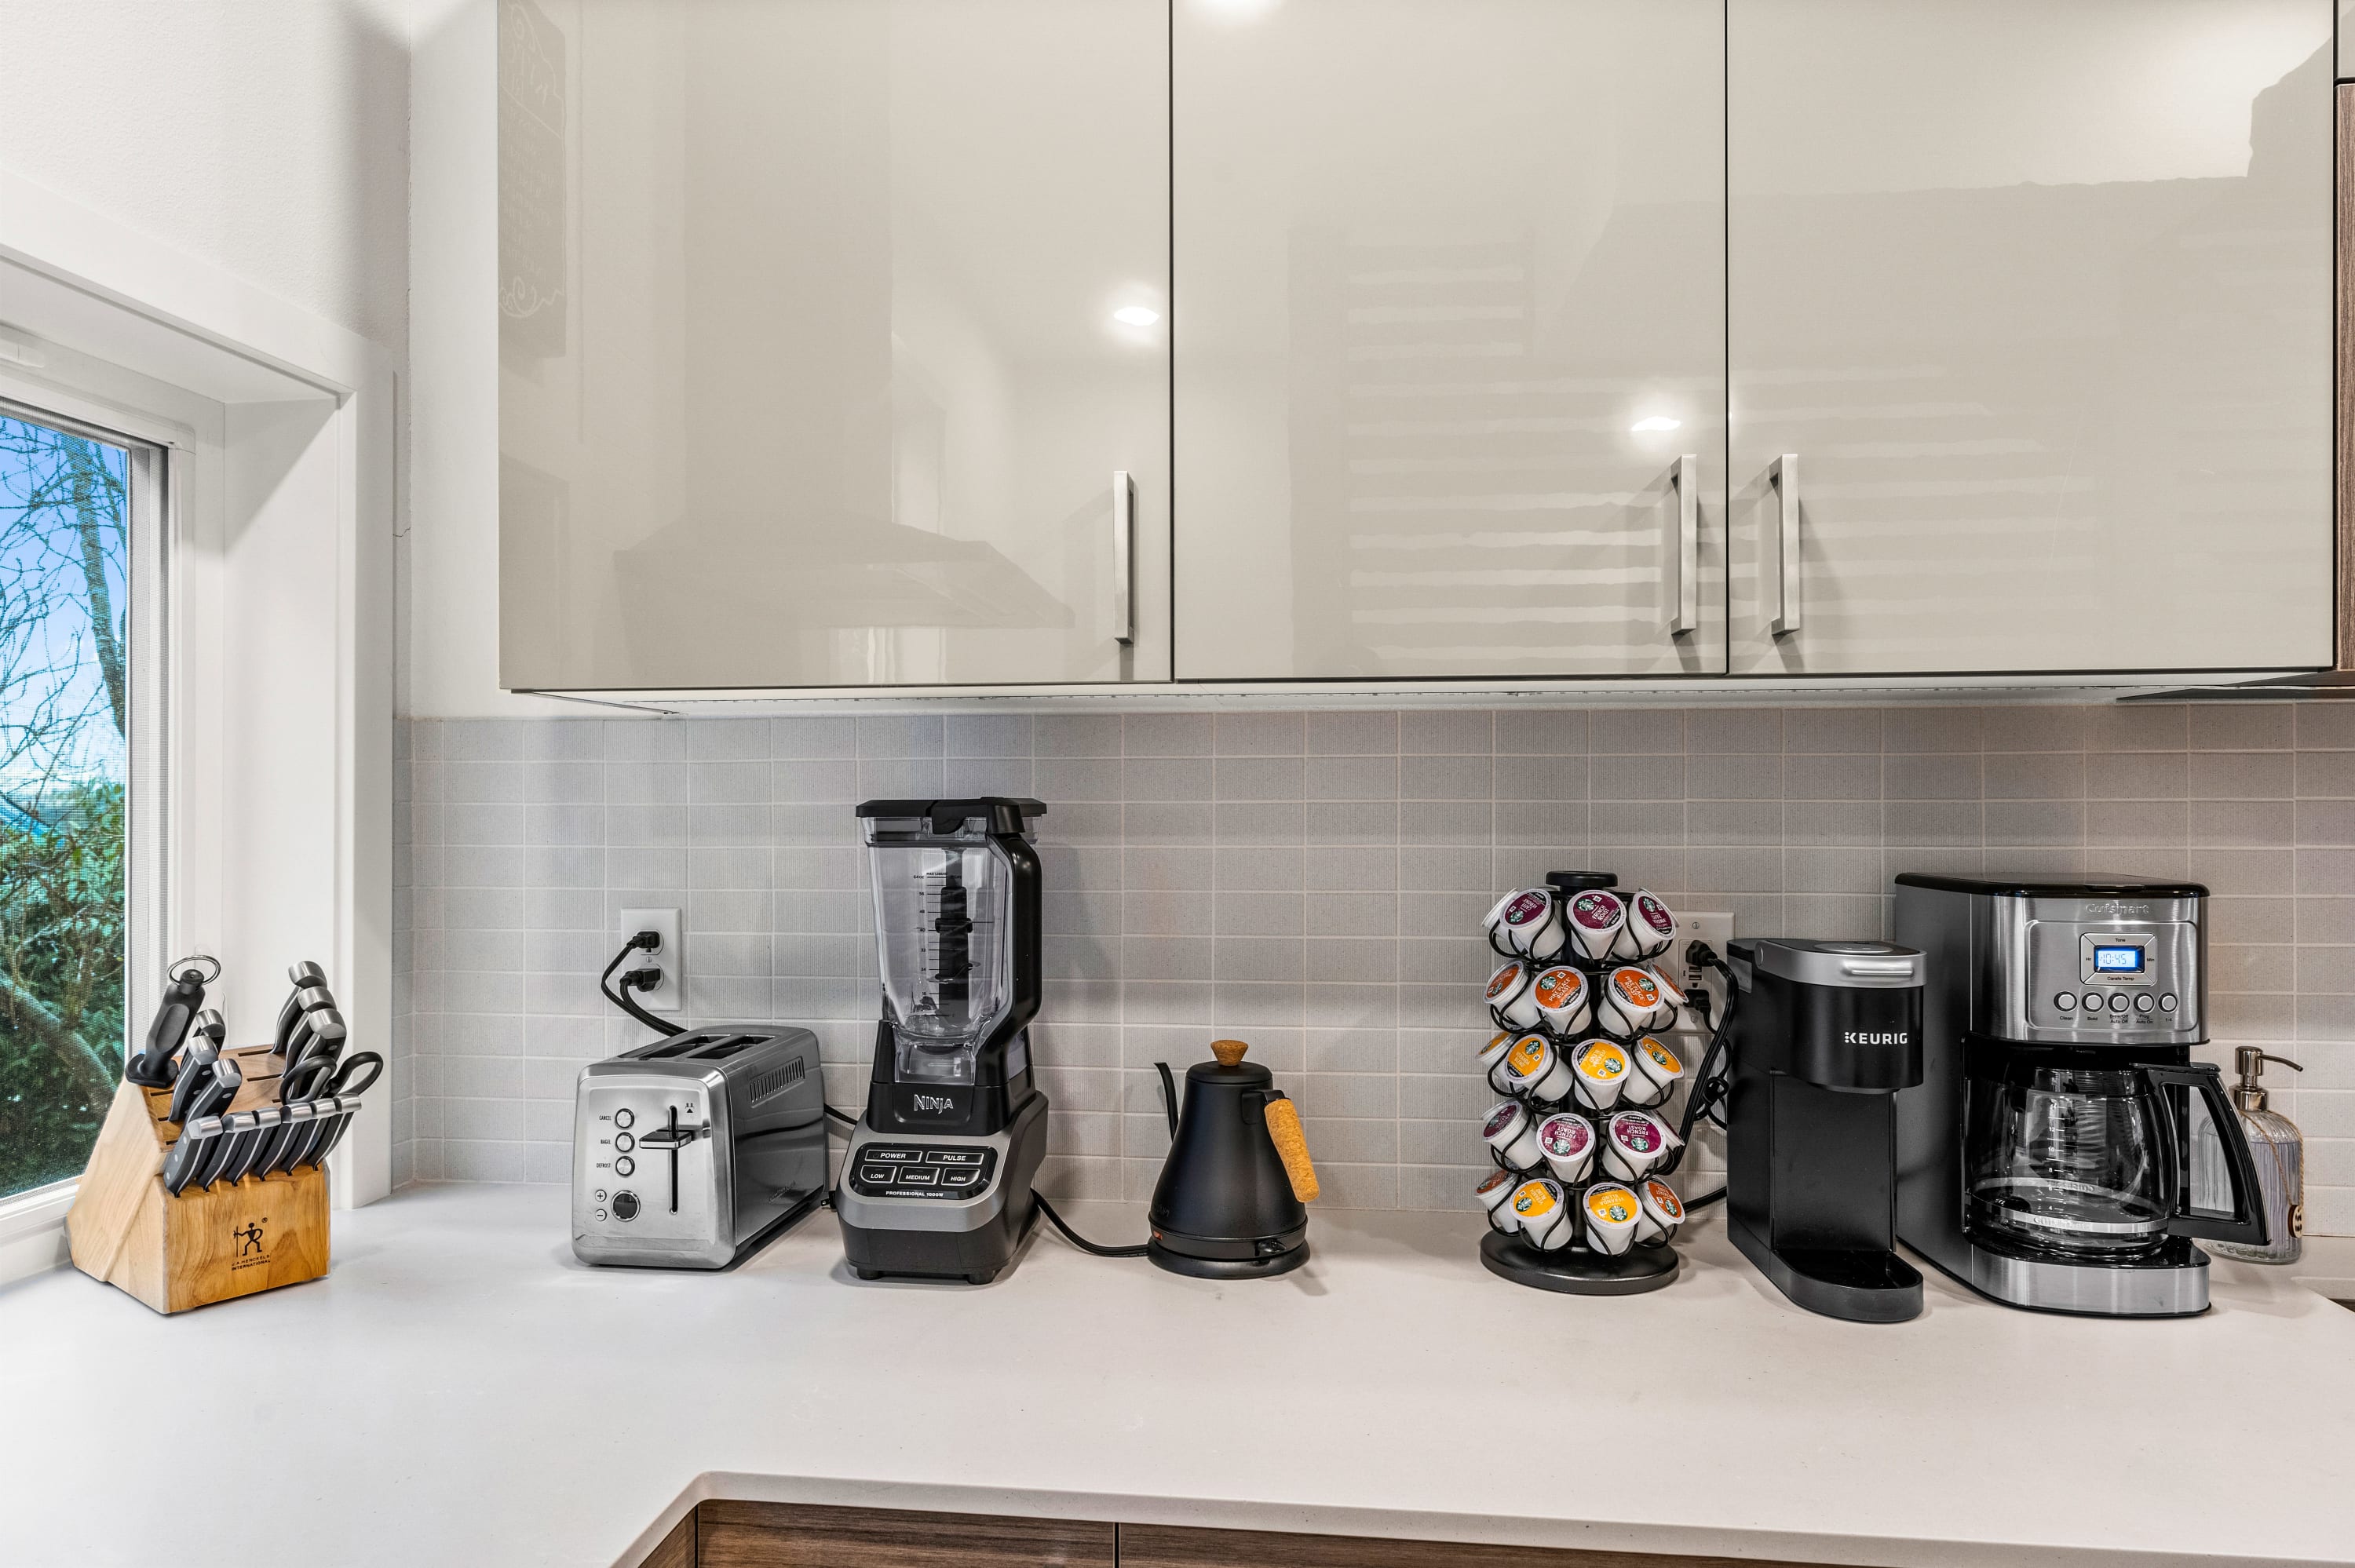 The kitchen is fully equipped with Toaster, blender, Keurig, K cups, Drip Coffee and more!